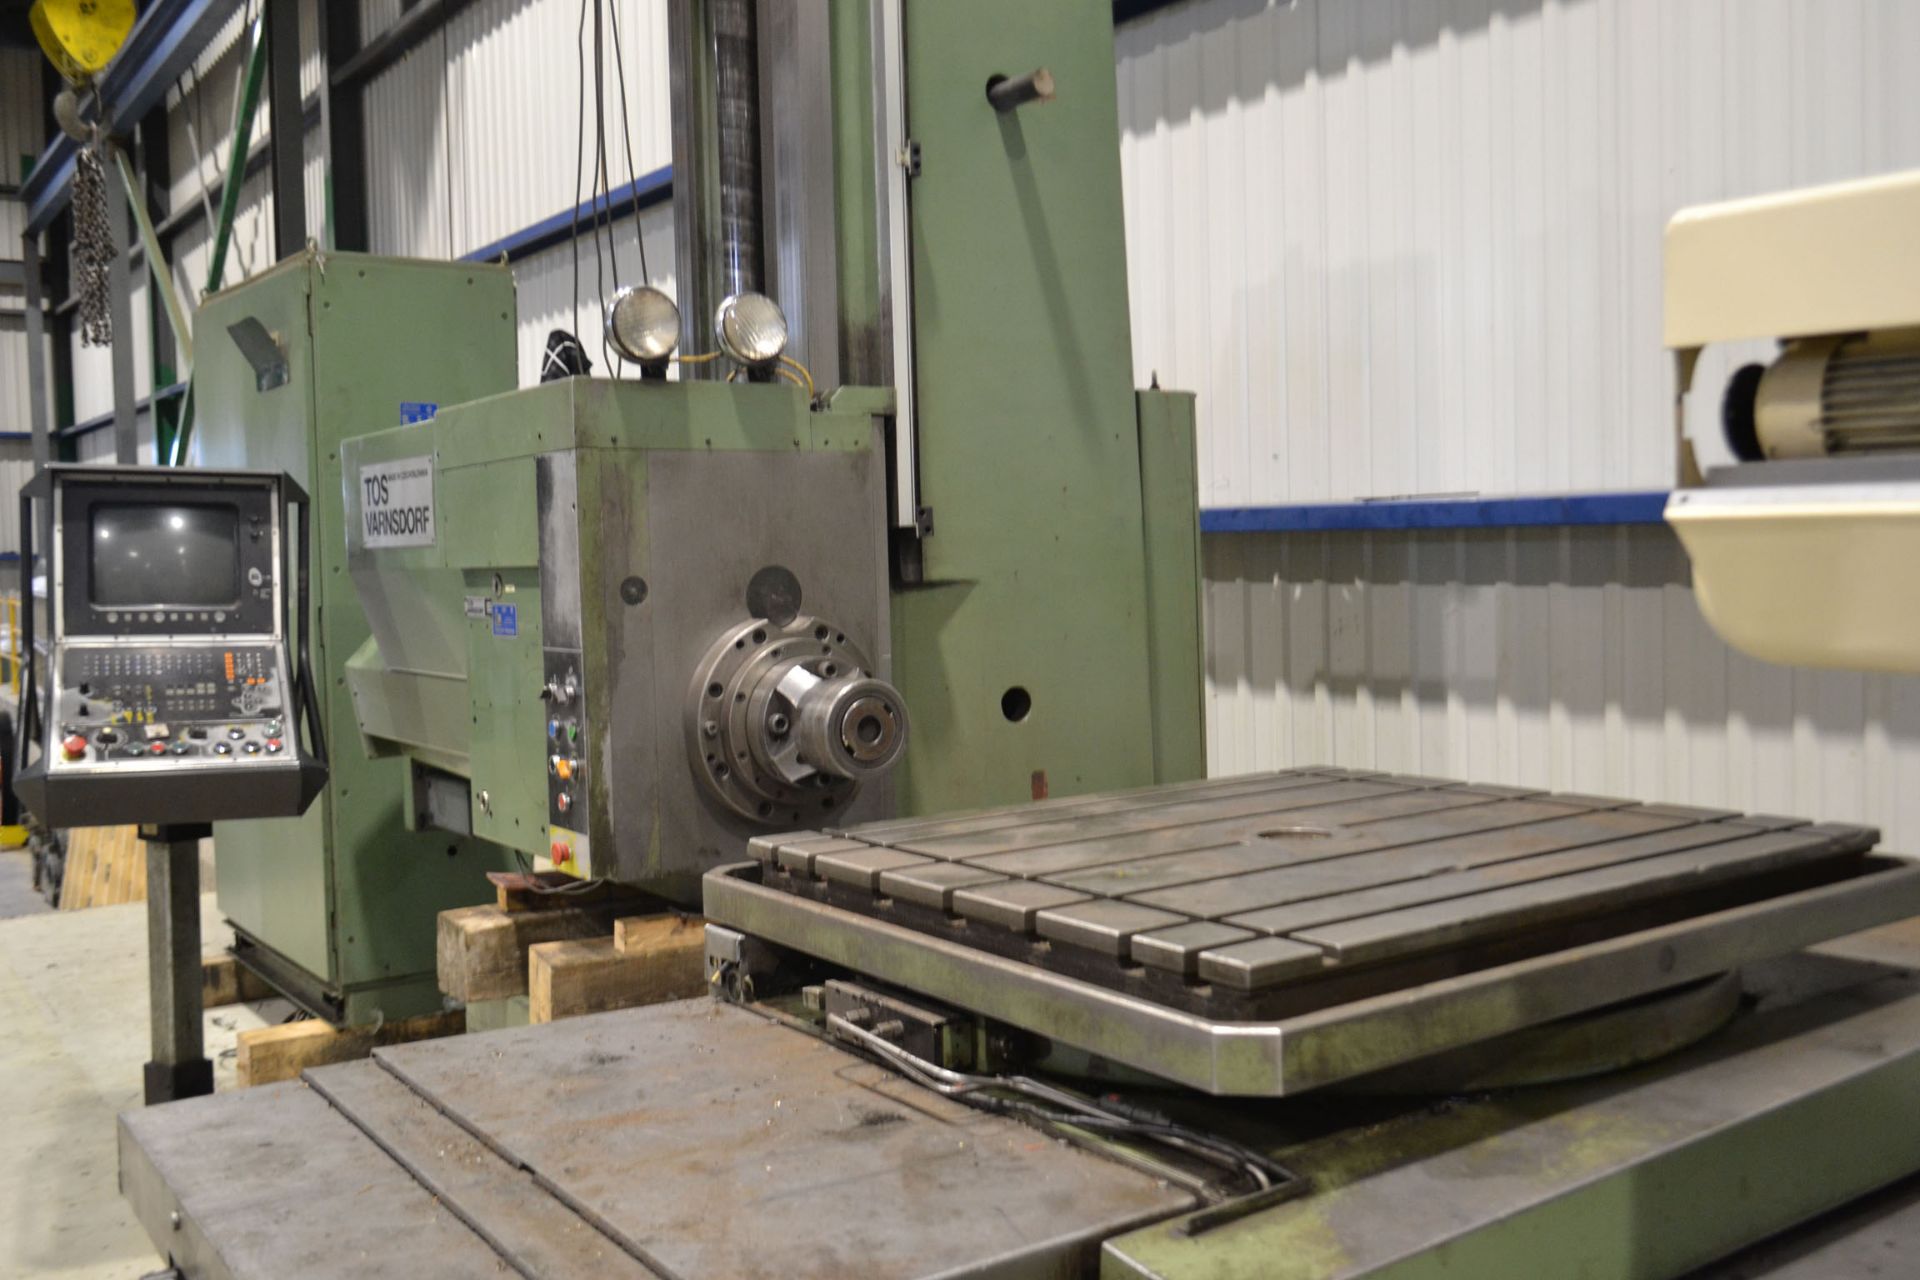 TOS VARNSDORF TABLE TYPE HORIZ. BORING MILL MODEL: WH 10 CNC, WORK SPINDLE DIAMETER: 100 MM (4”) - Image 4 of 4